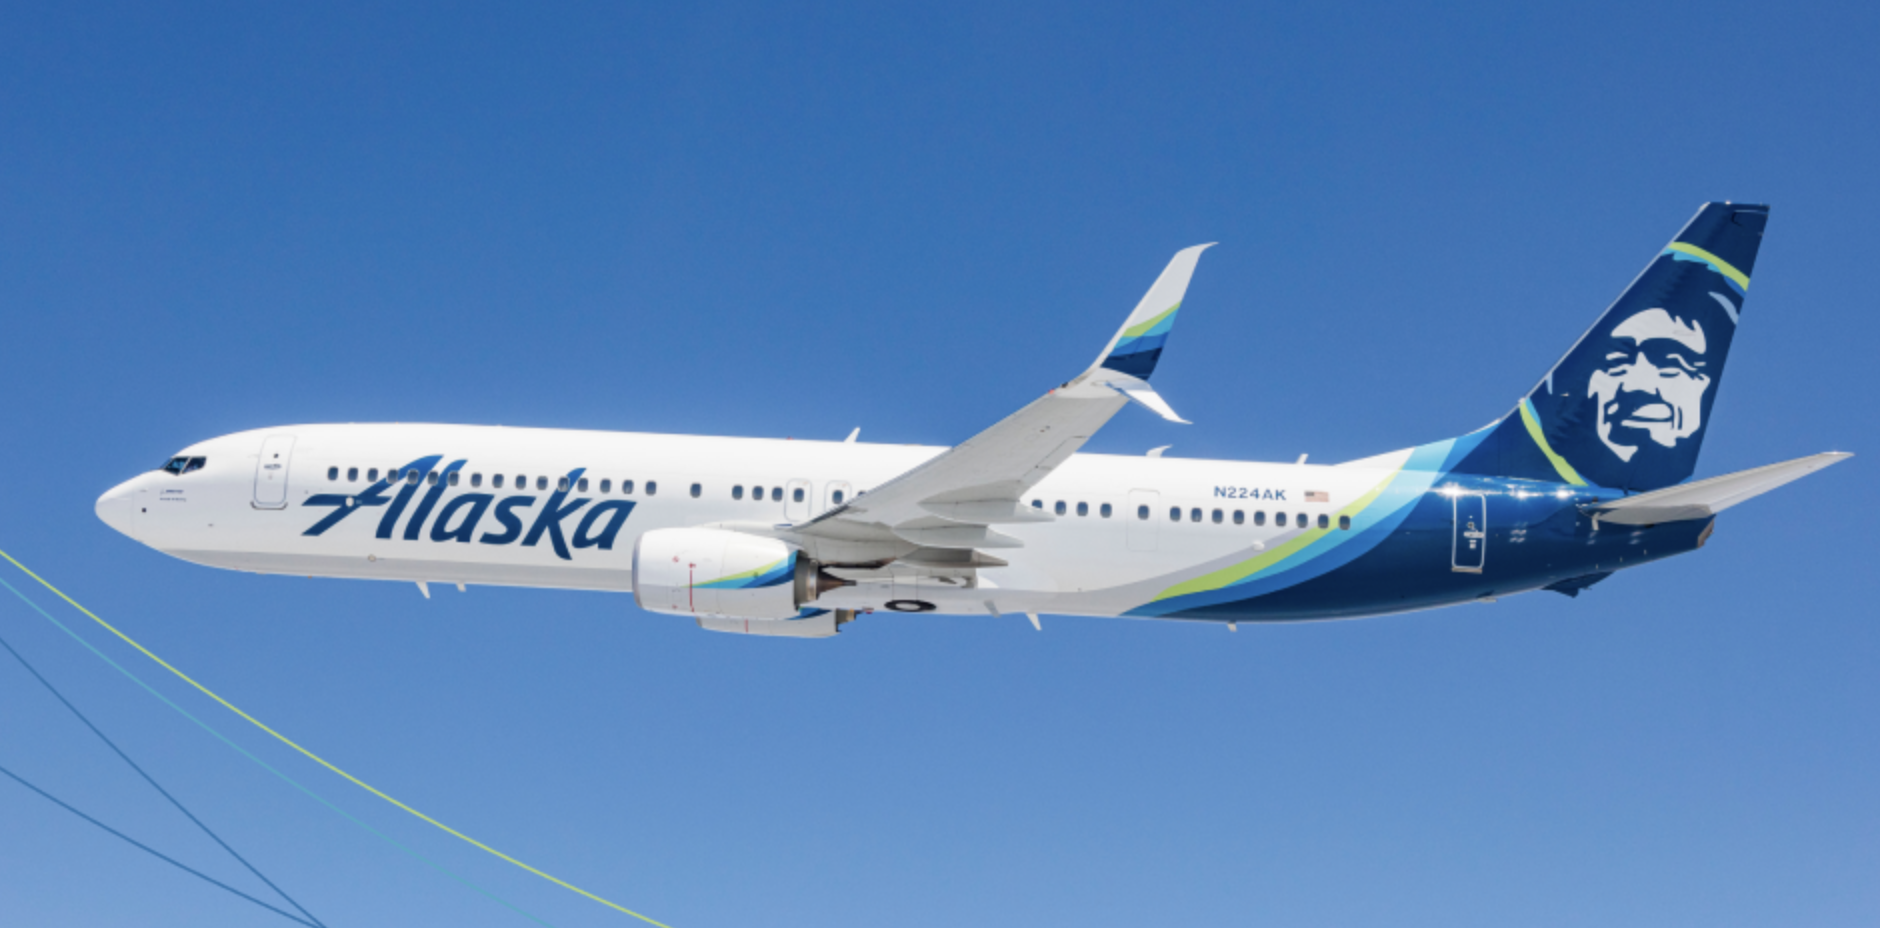 NEWS: Alaska Airlines Cancels ALL Flights on Boeing 737 Max 9 Planes ...